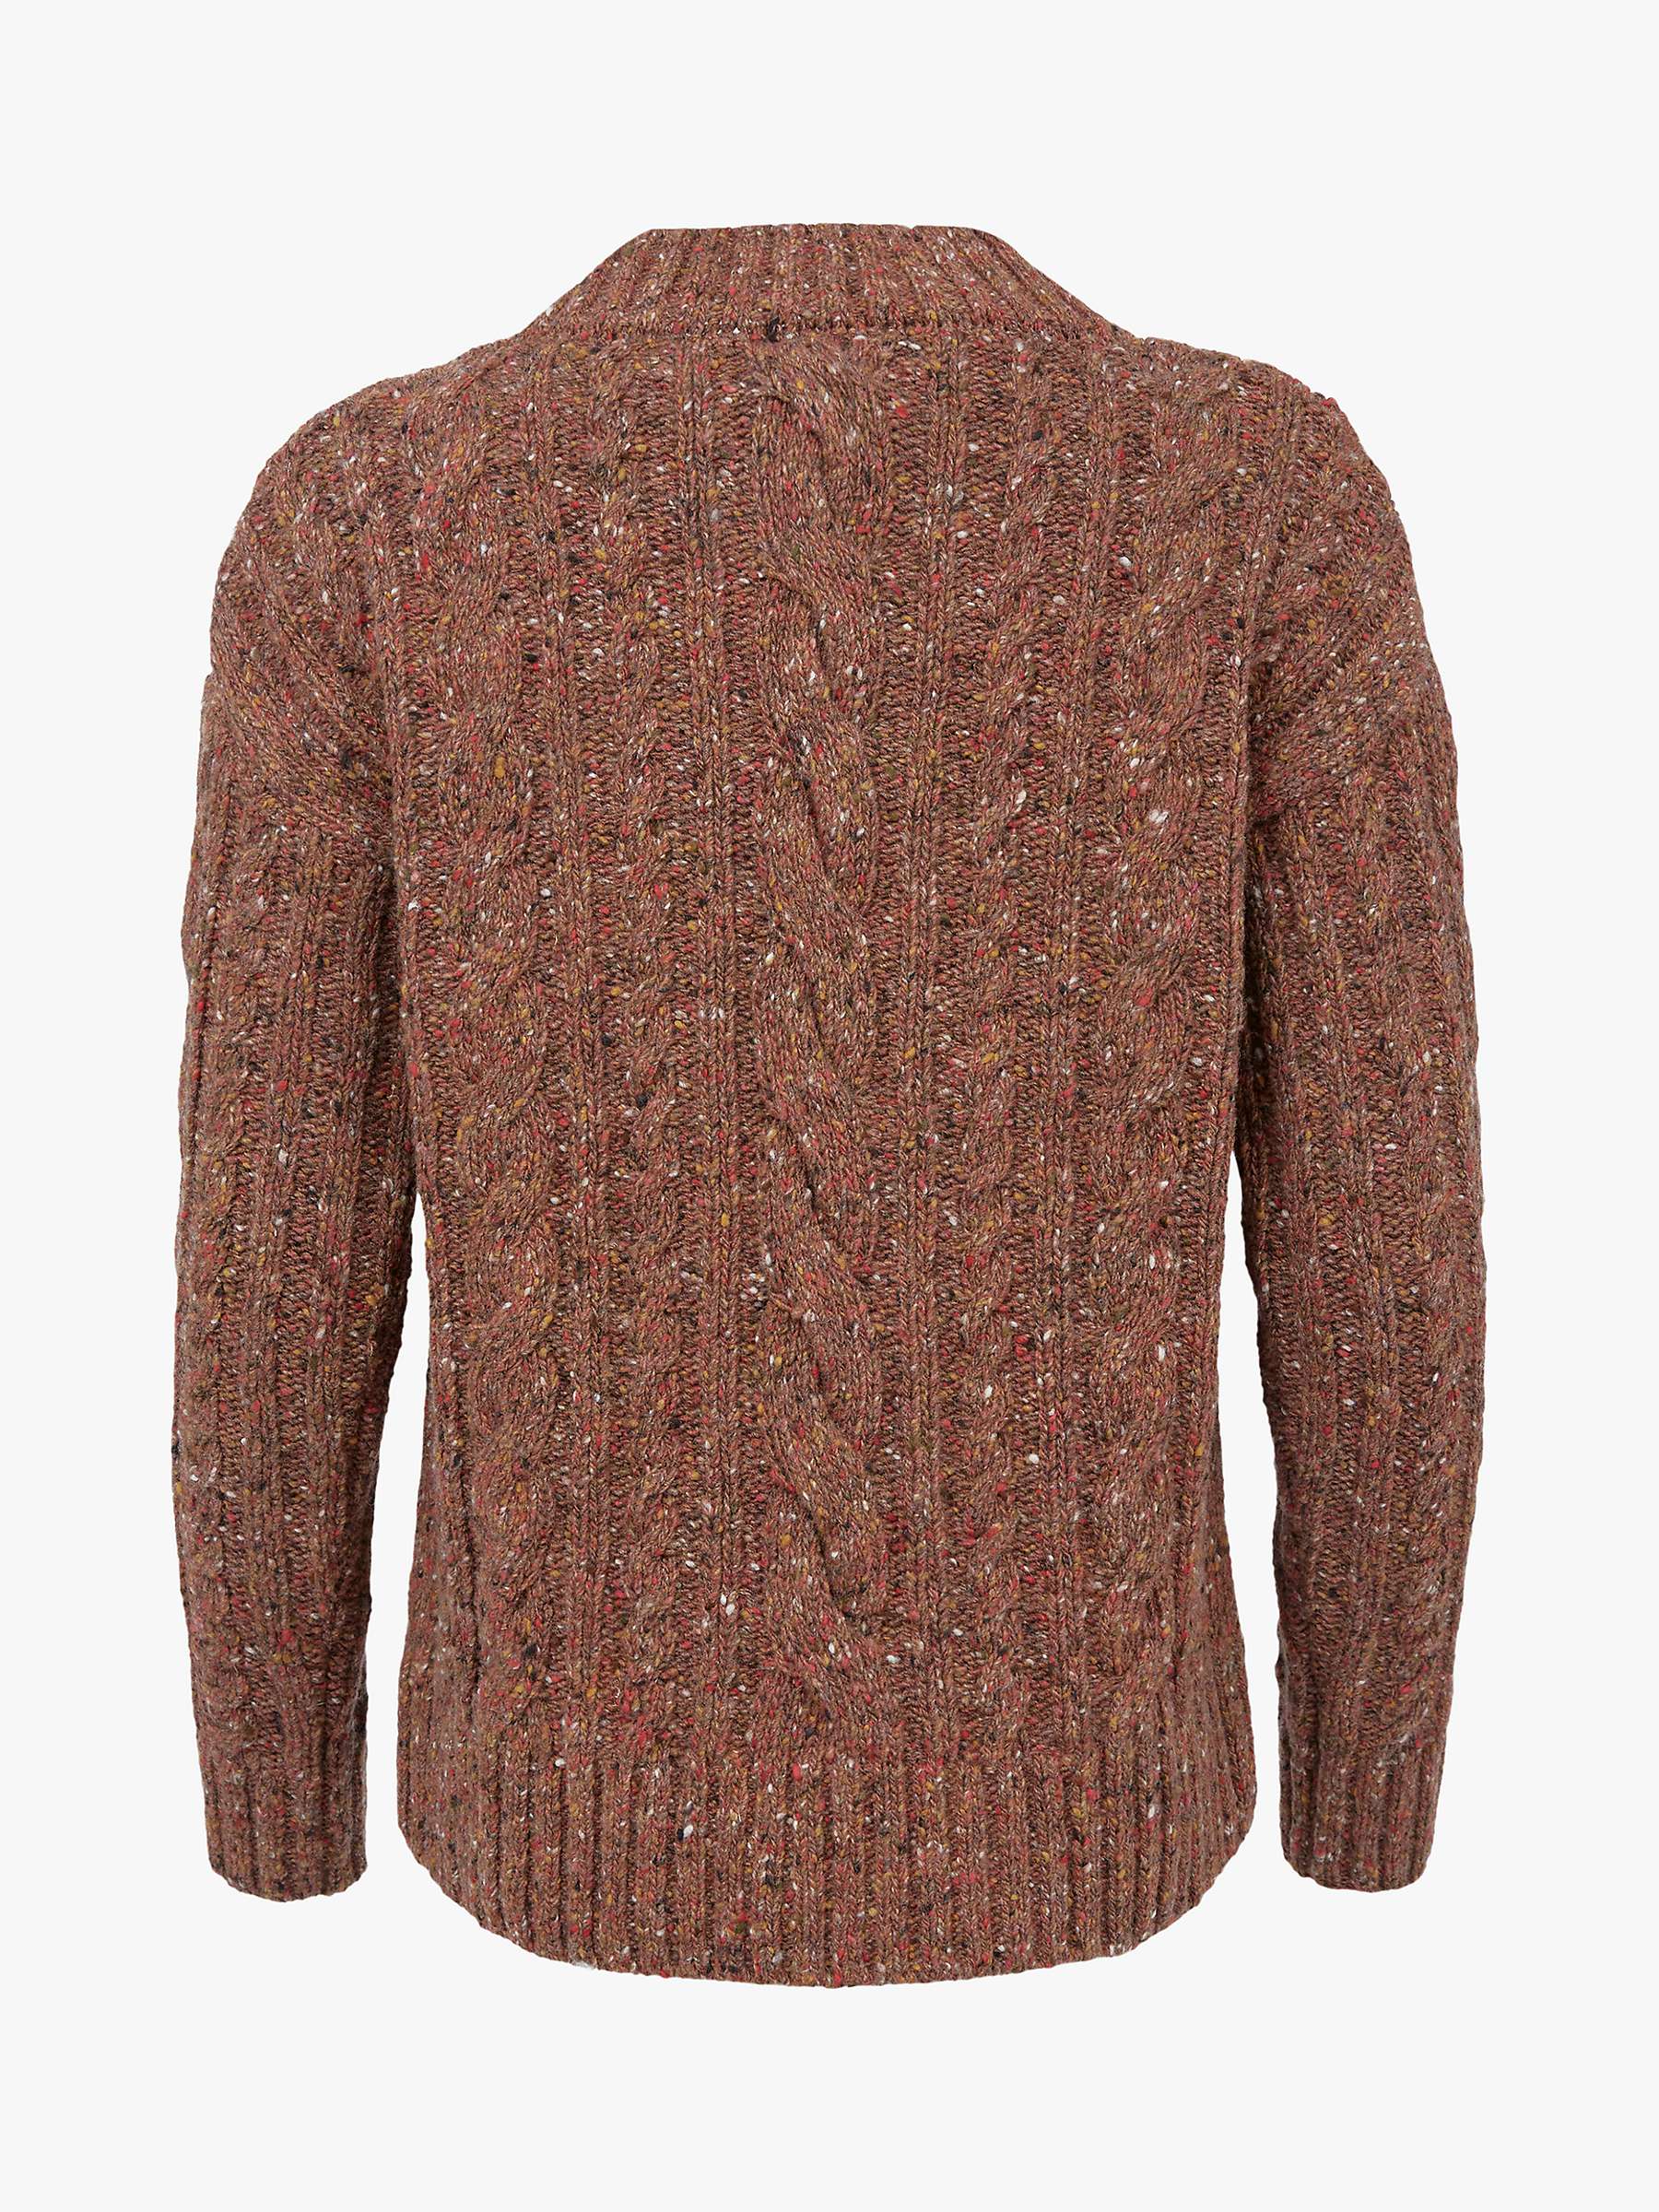 Buy Celtic & Co. Donegal Wool Cable Crew Neck Jumper, Rust Online at johnlewis.com